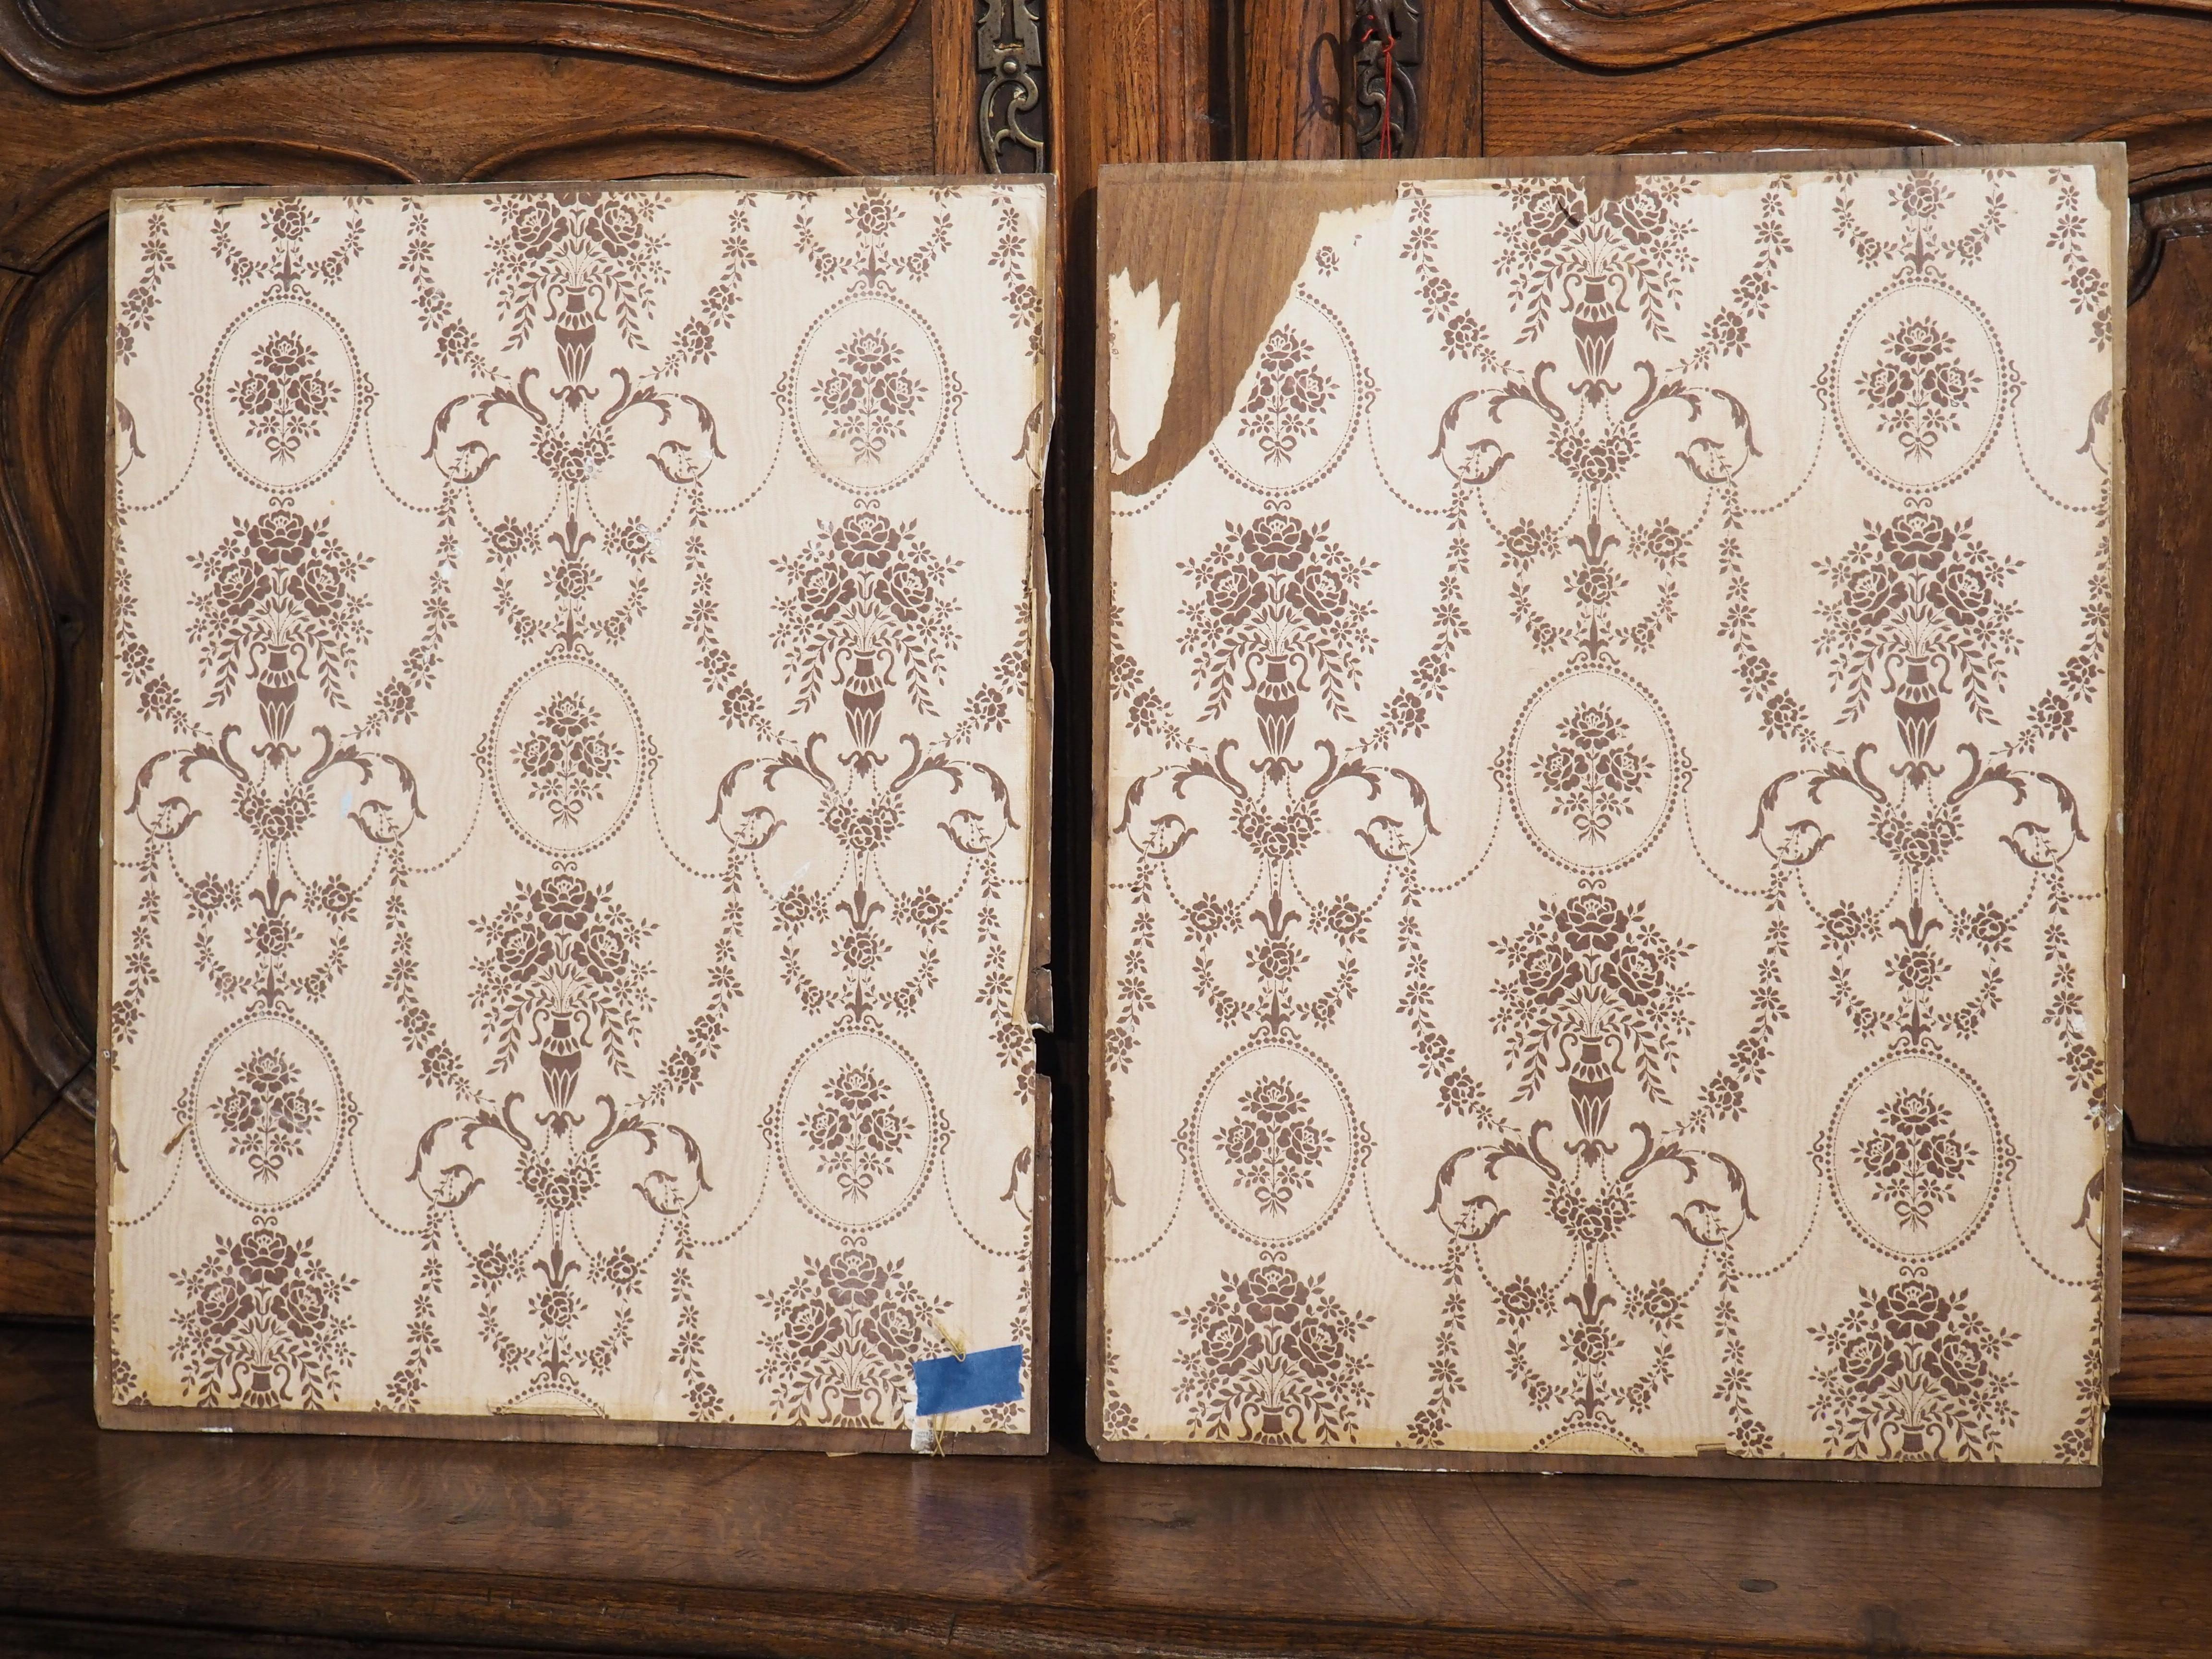 Hand-carved in Spain, circa 1850, this pair of walnut panels features portraits in profile of an armor-clad man and woman. Both panels have been painted light gray with cream accents, while the verso side is lined with cream-colored paper